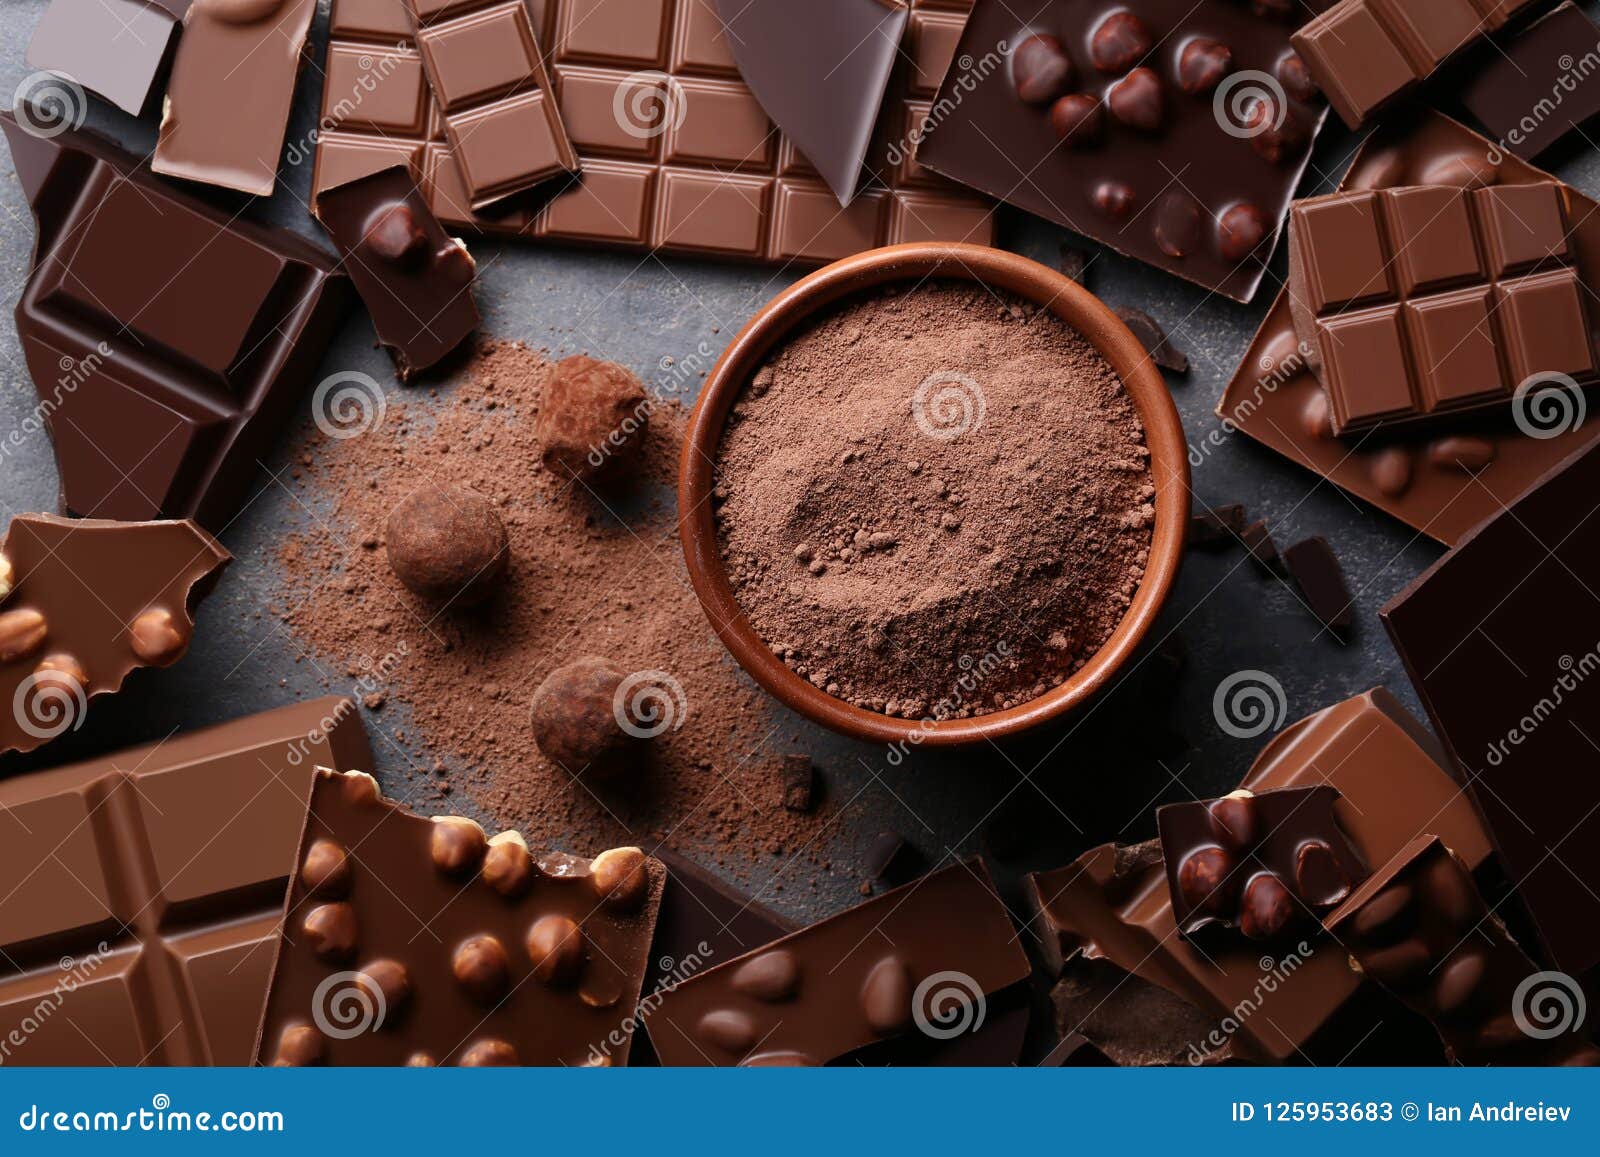 chocolate with cocoa powder